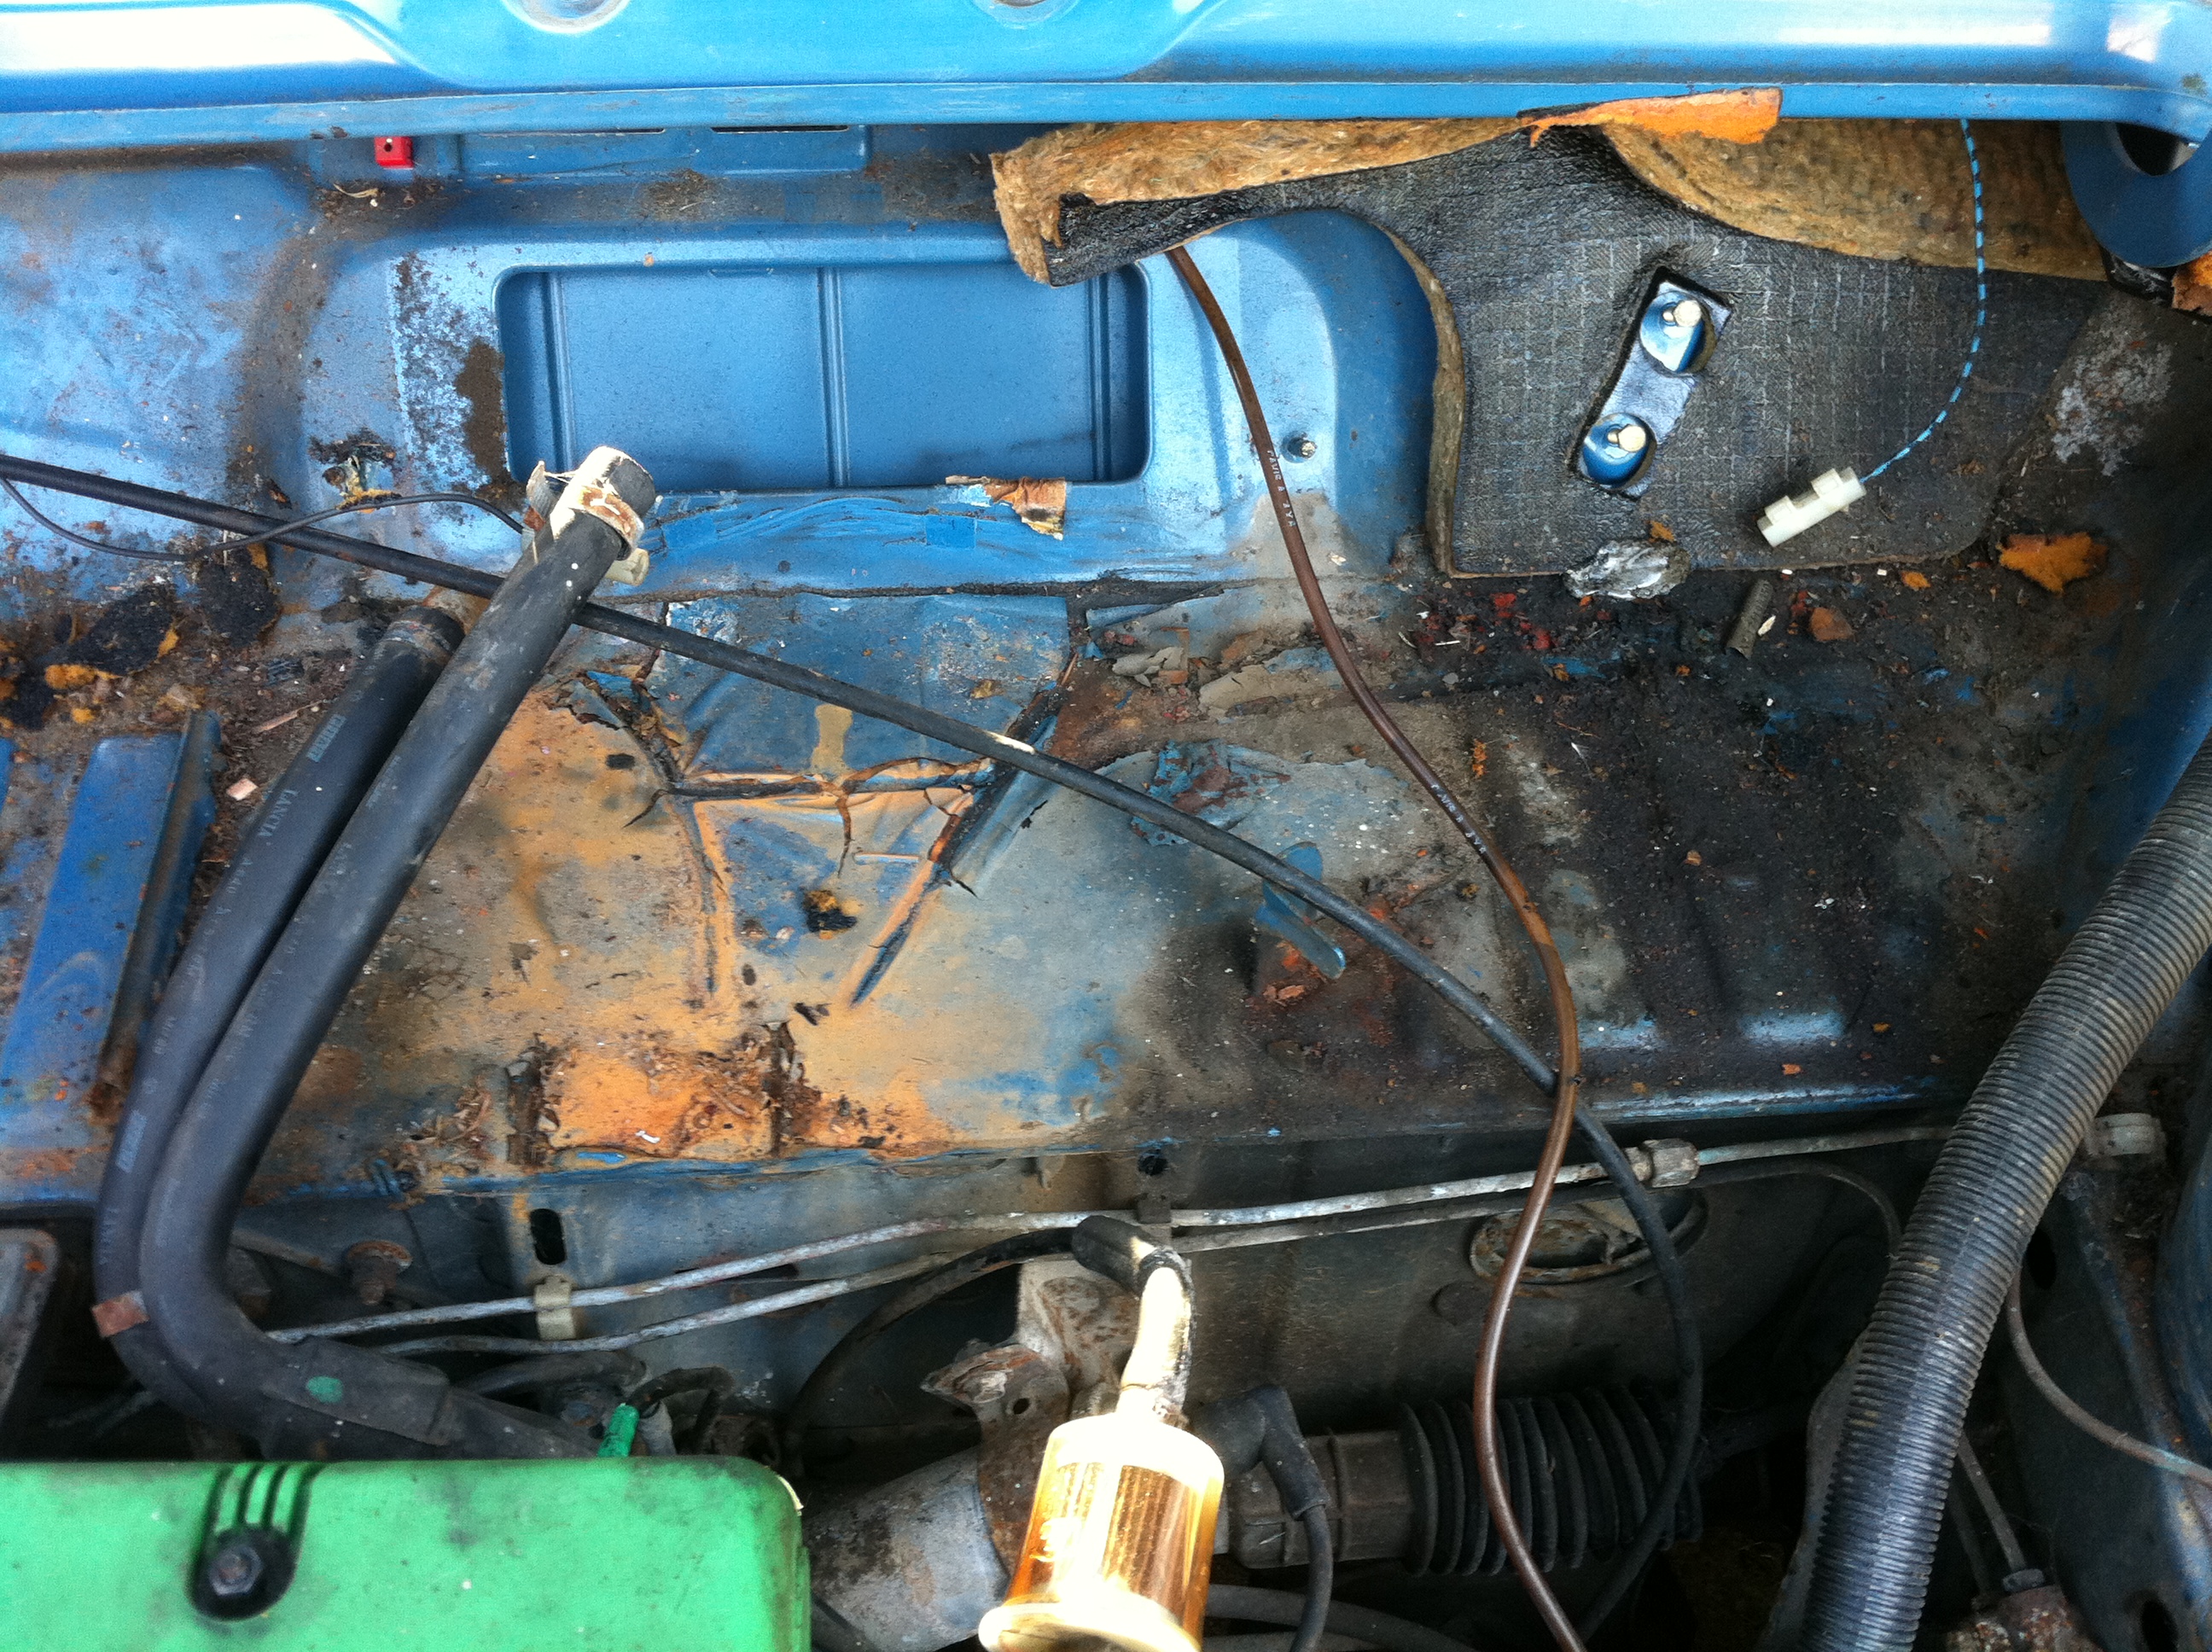 Gutting The Engine Bay - Pre Clean-up